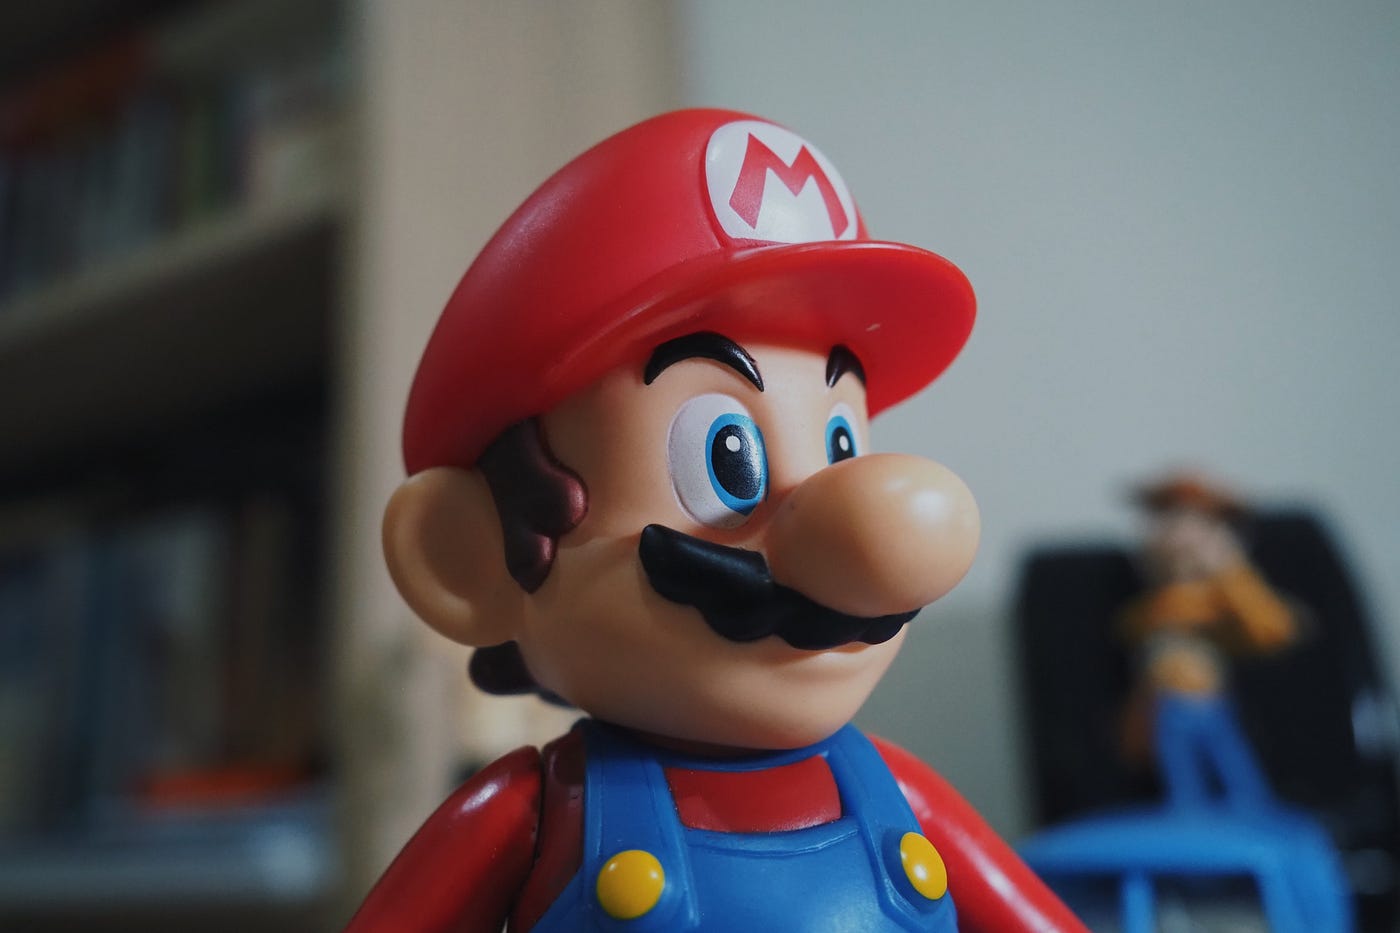 Best Mario games to help you tap into your inner Italian